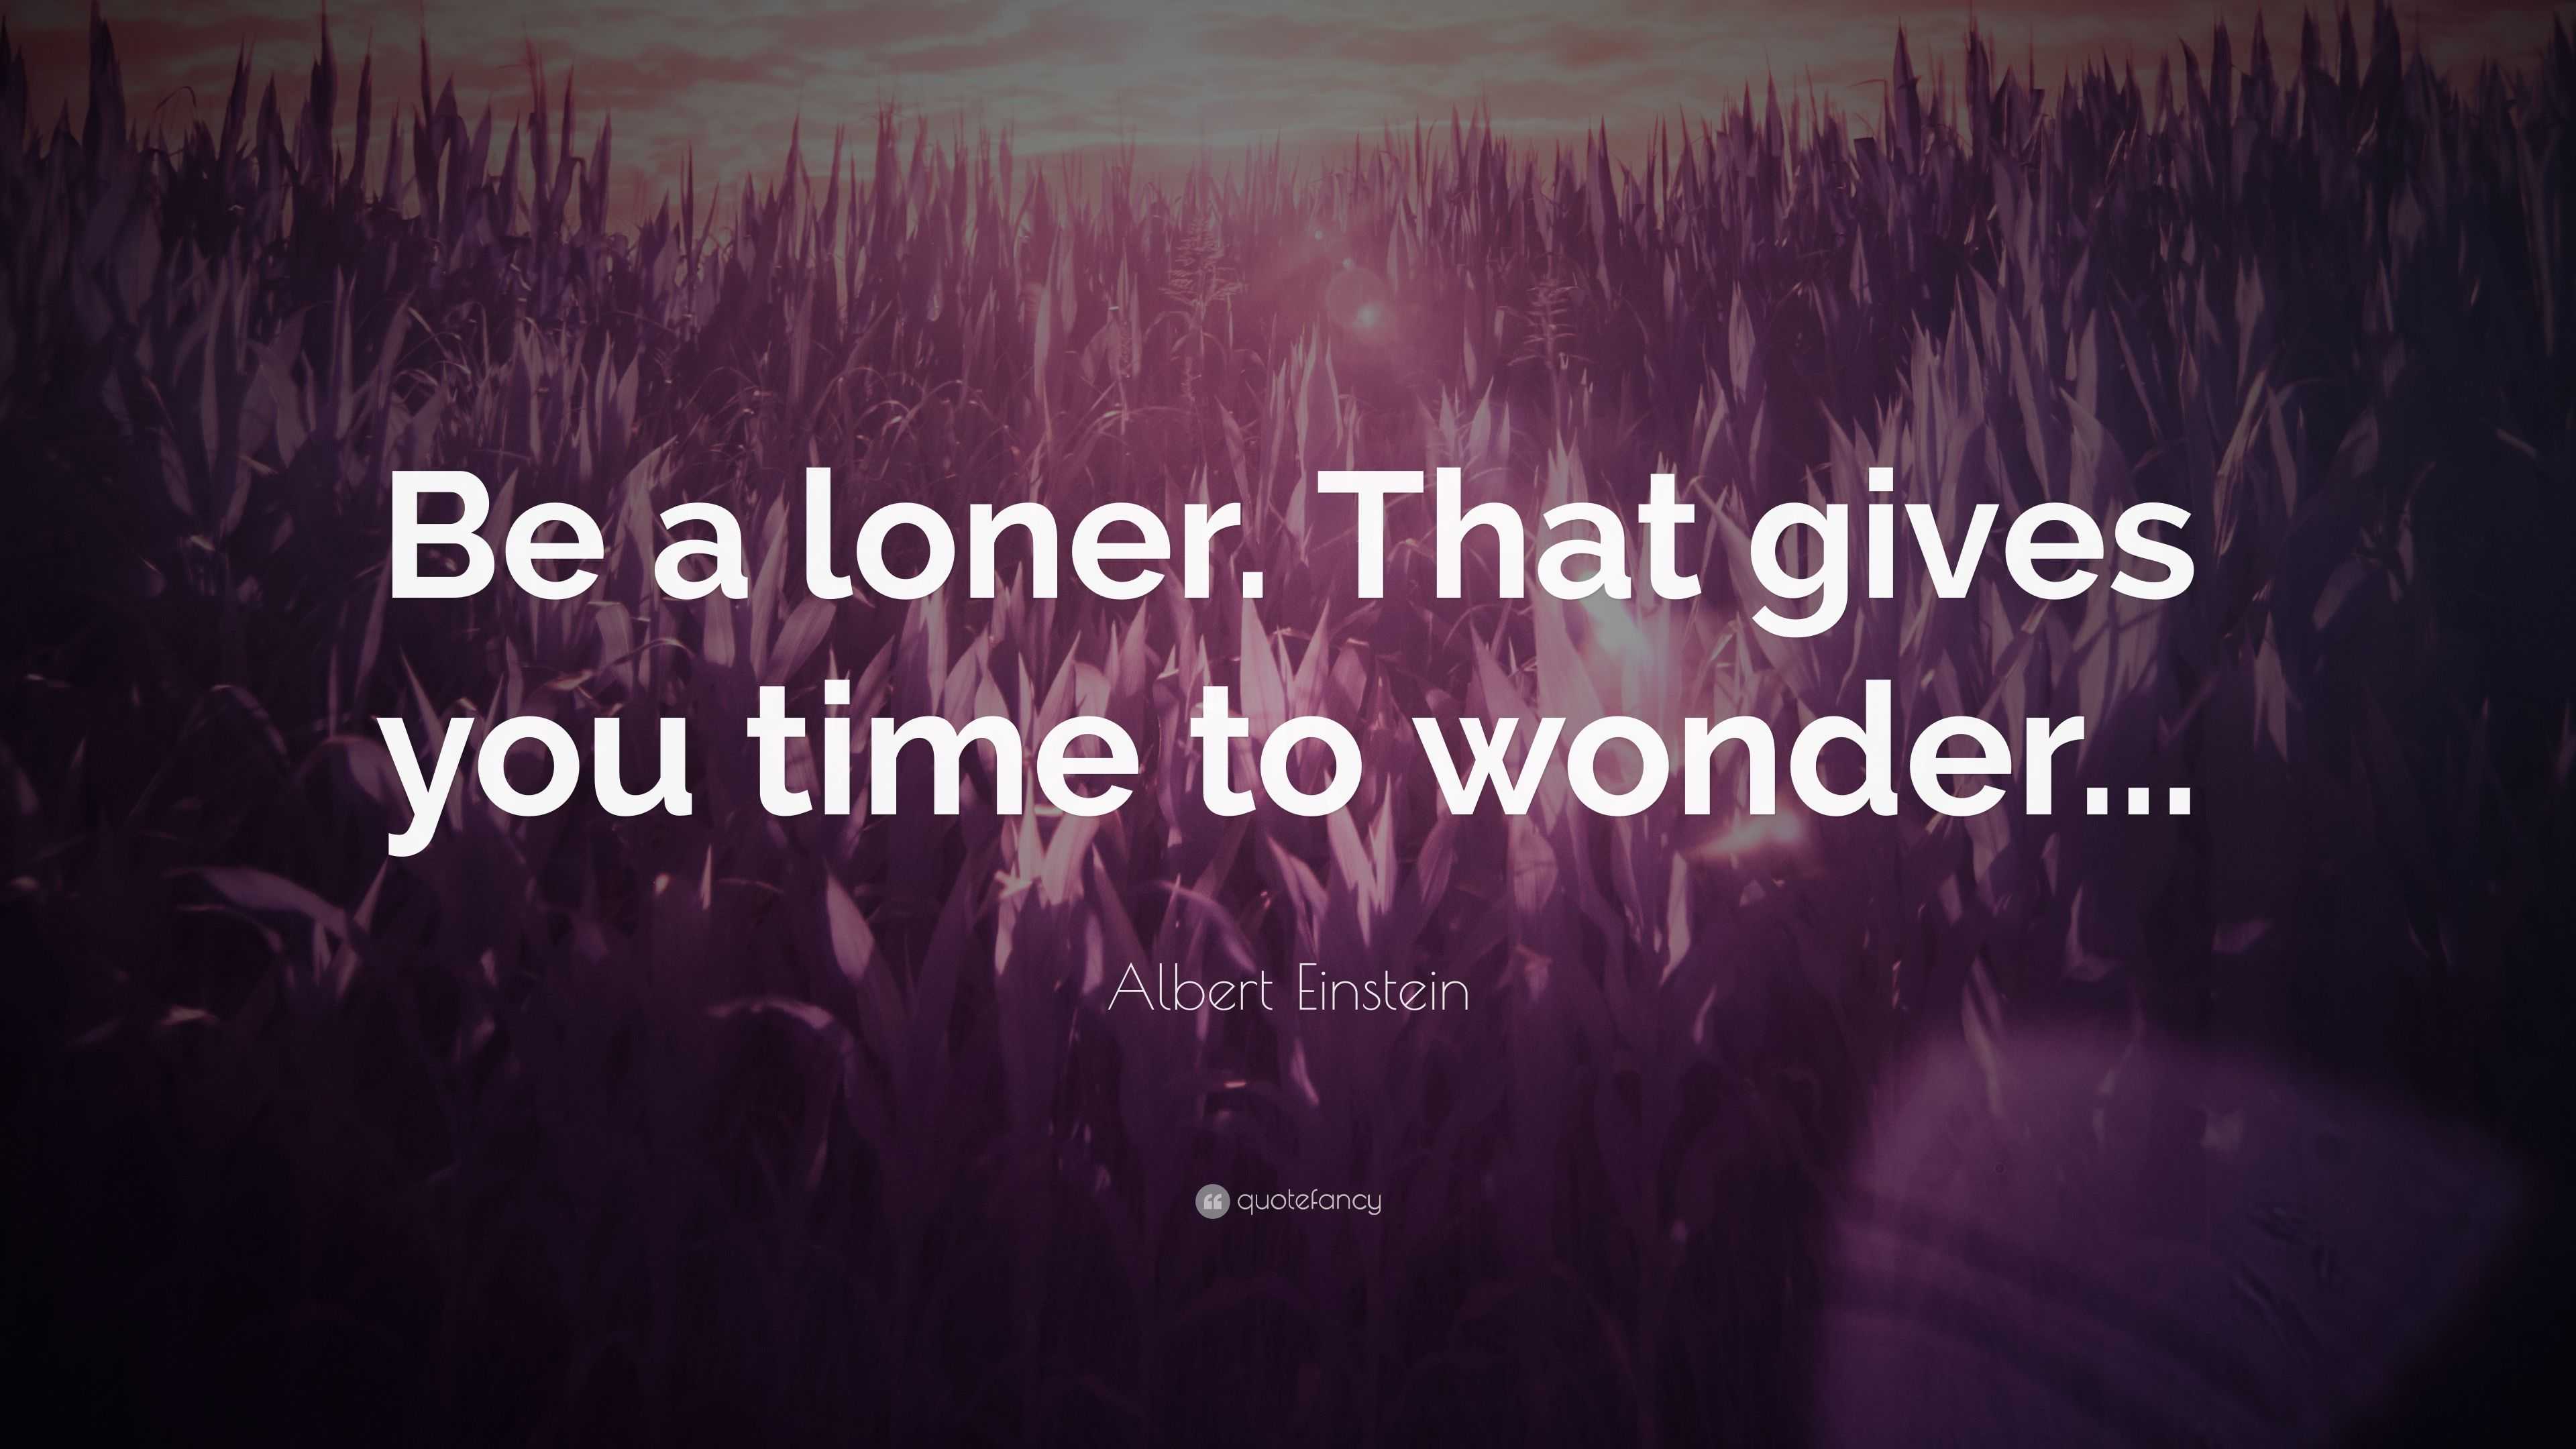 Albert Einstein Quote: “Be a loner. That gives you time to wonder...”